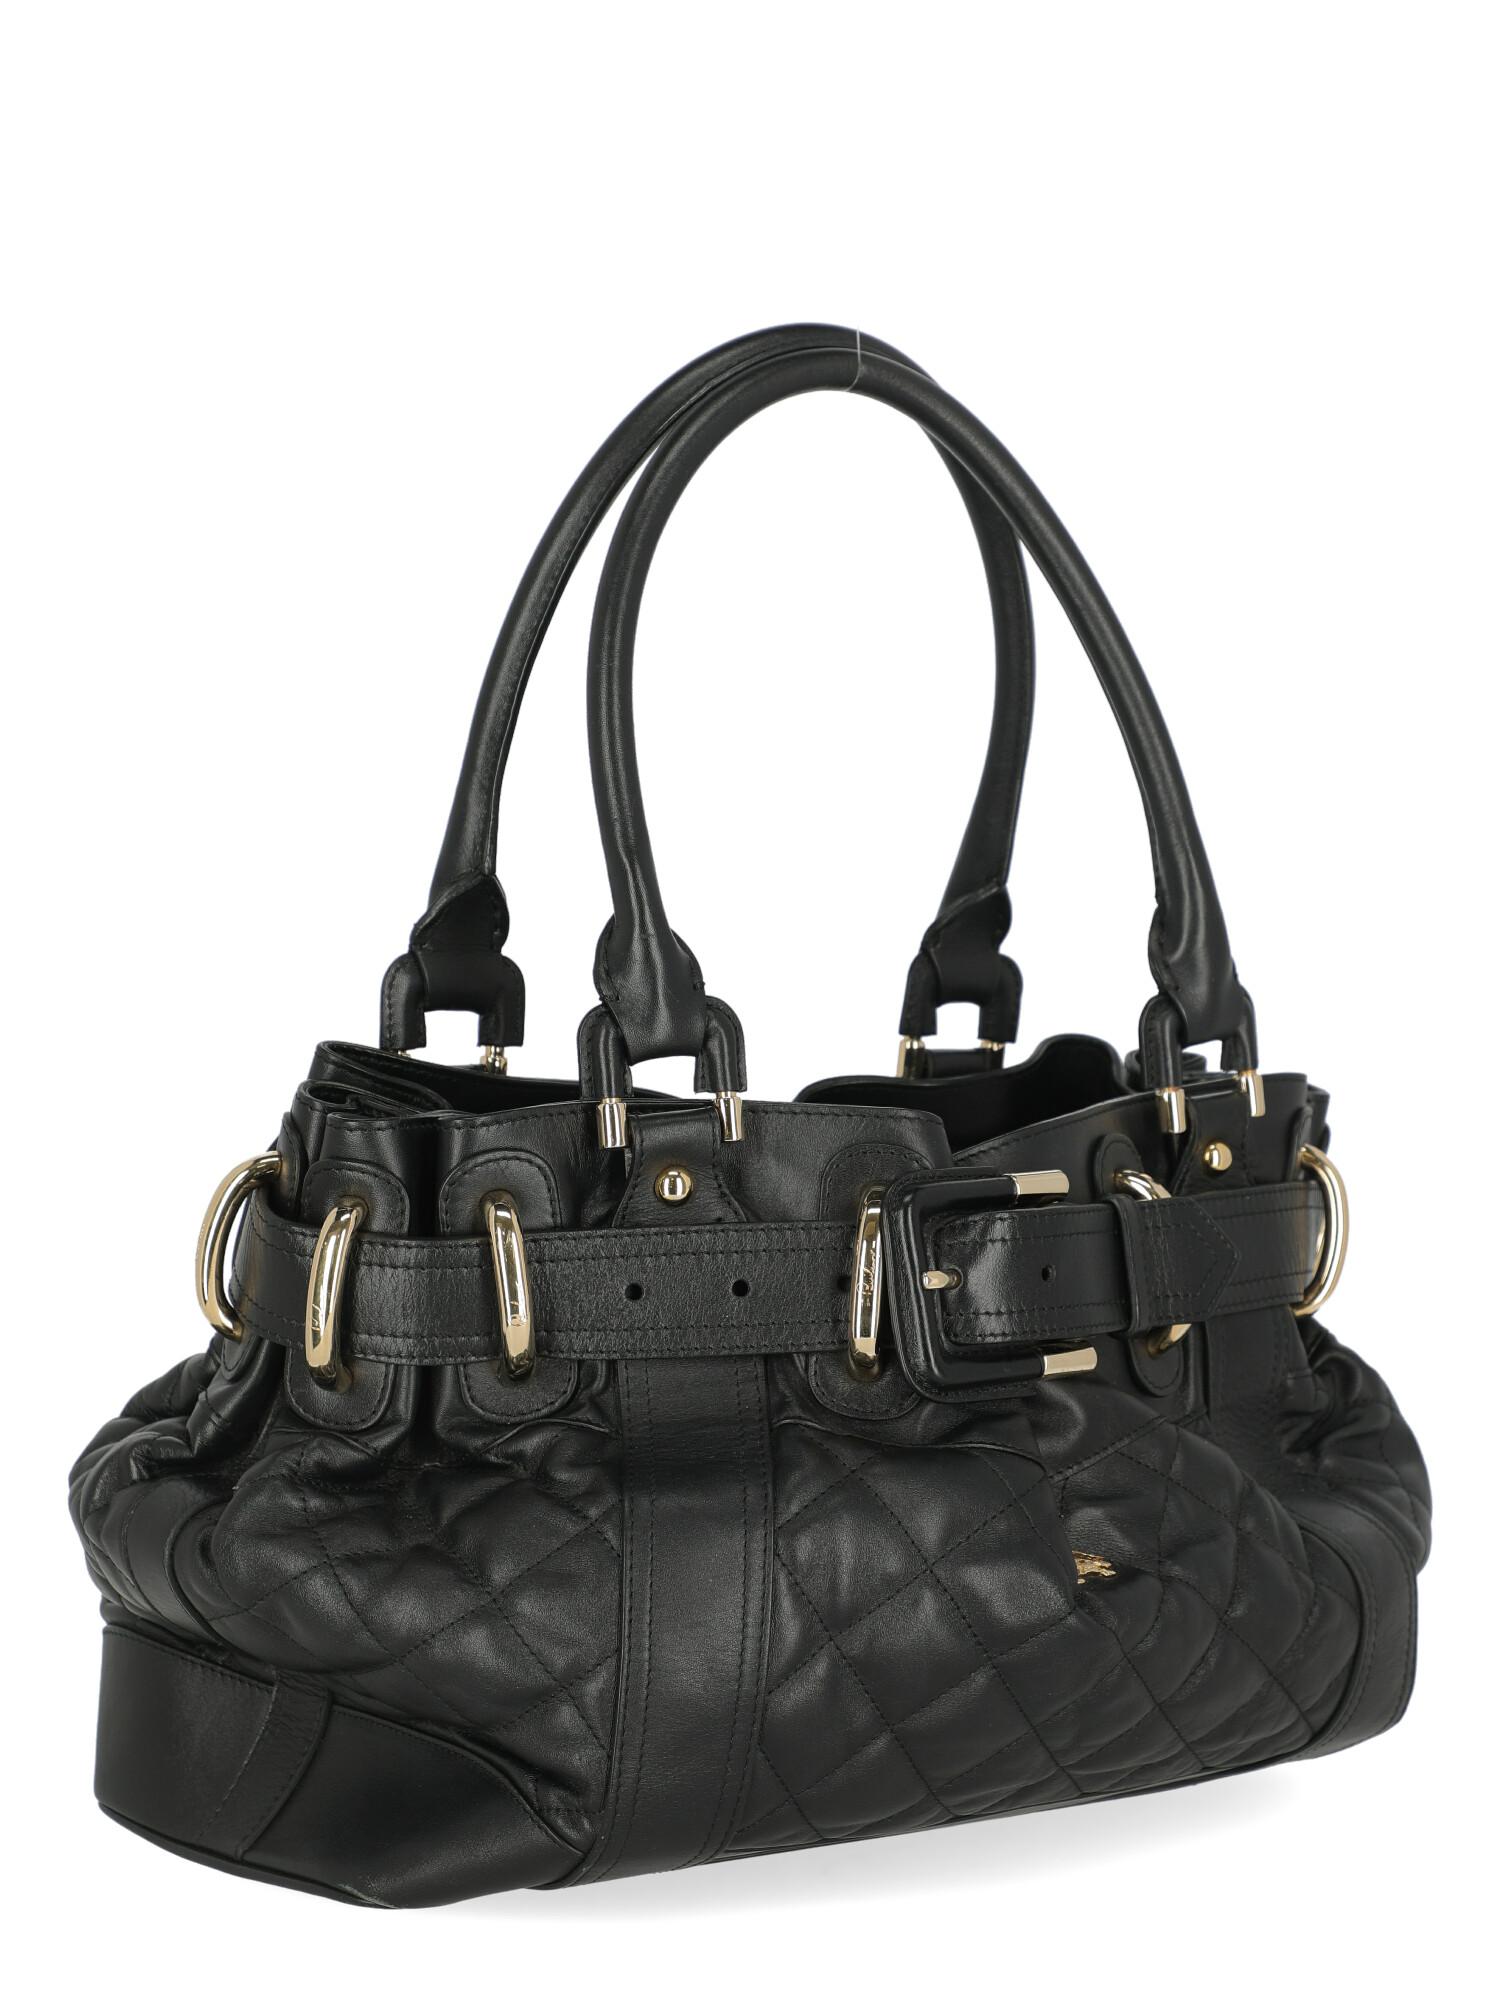 Burberry Women Shoulder bags Black Leather  In Fair Condition For Sale In Milan, IT